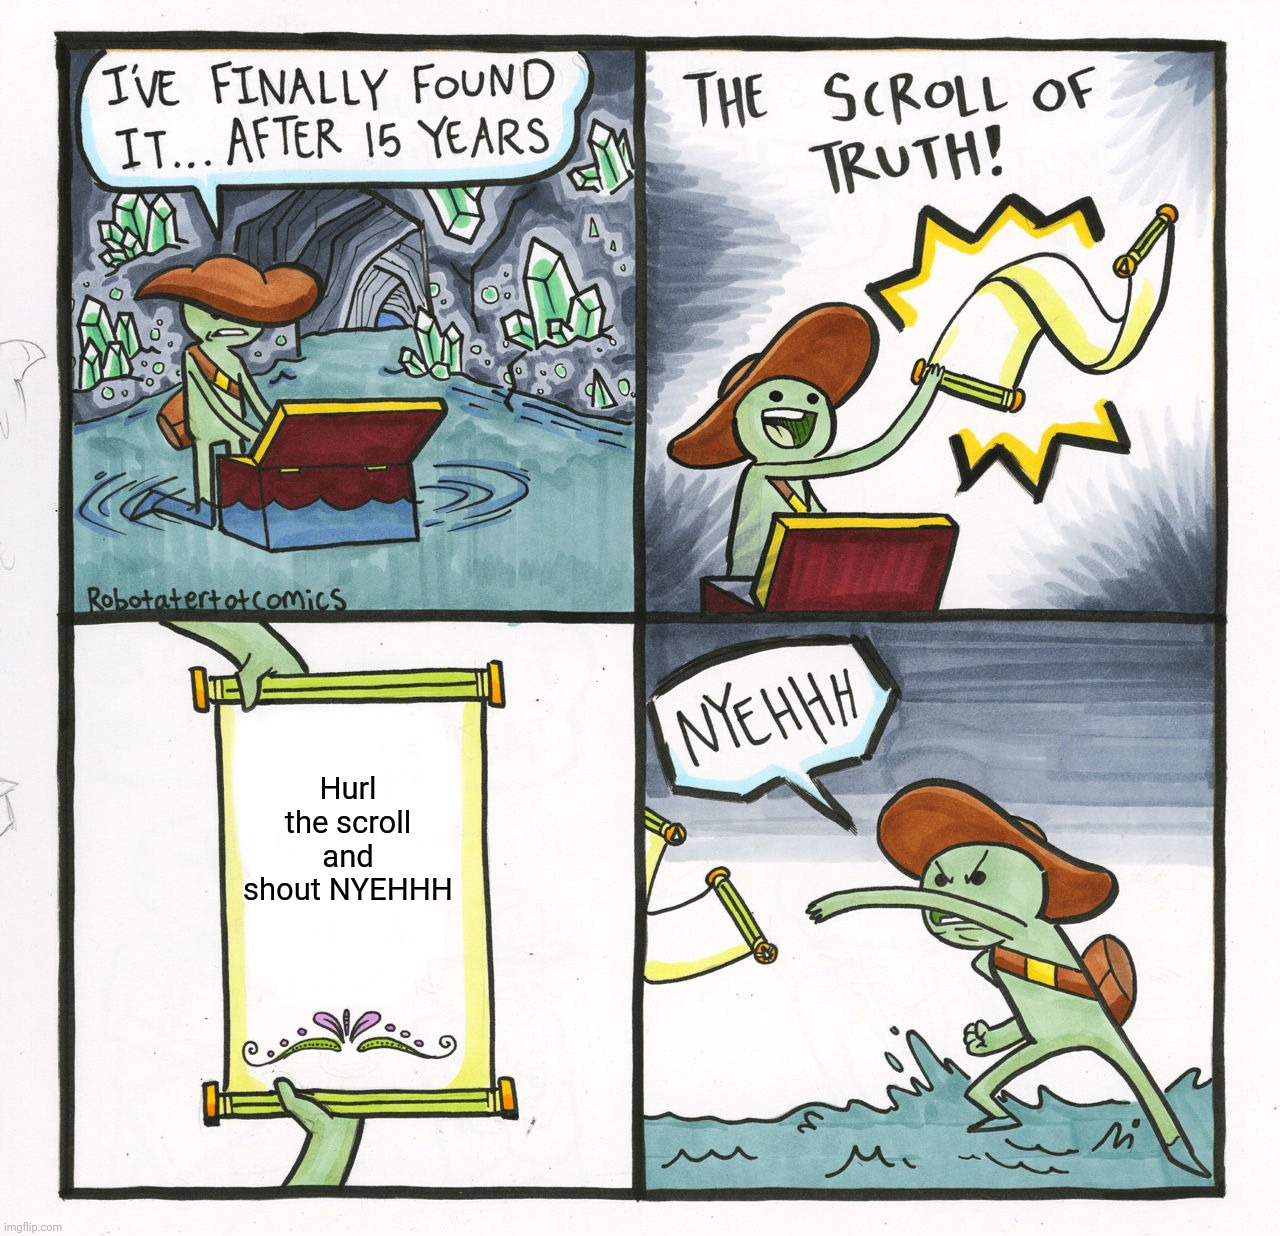 The Scroll Of Truth Meme | Hurl the scroll and shout NYEHHH | image tagged in memes,the scroll of truth,anti meme,antimeme,can't argue with that / technically not wrong | made w/ Imgflip meme maker